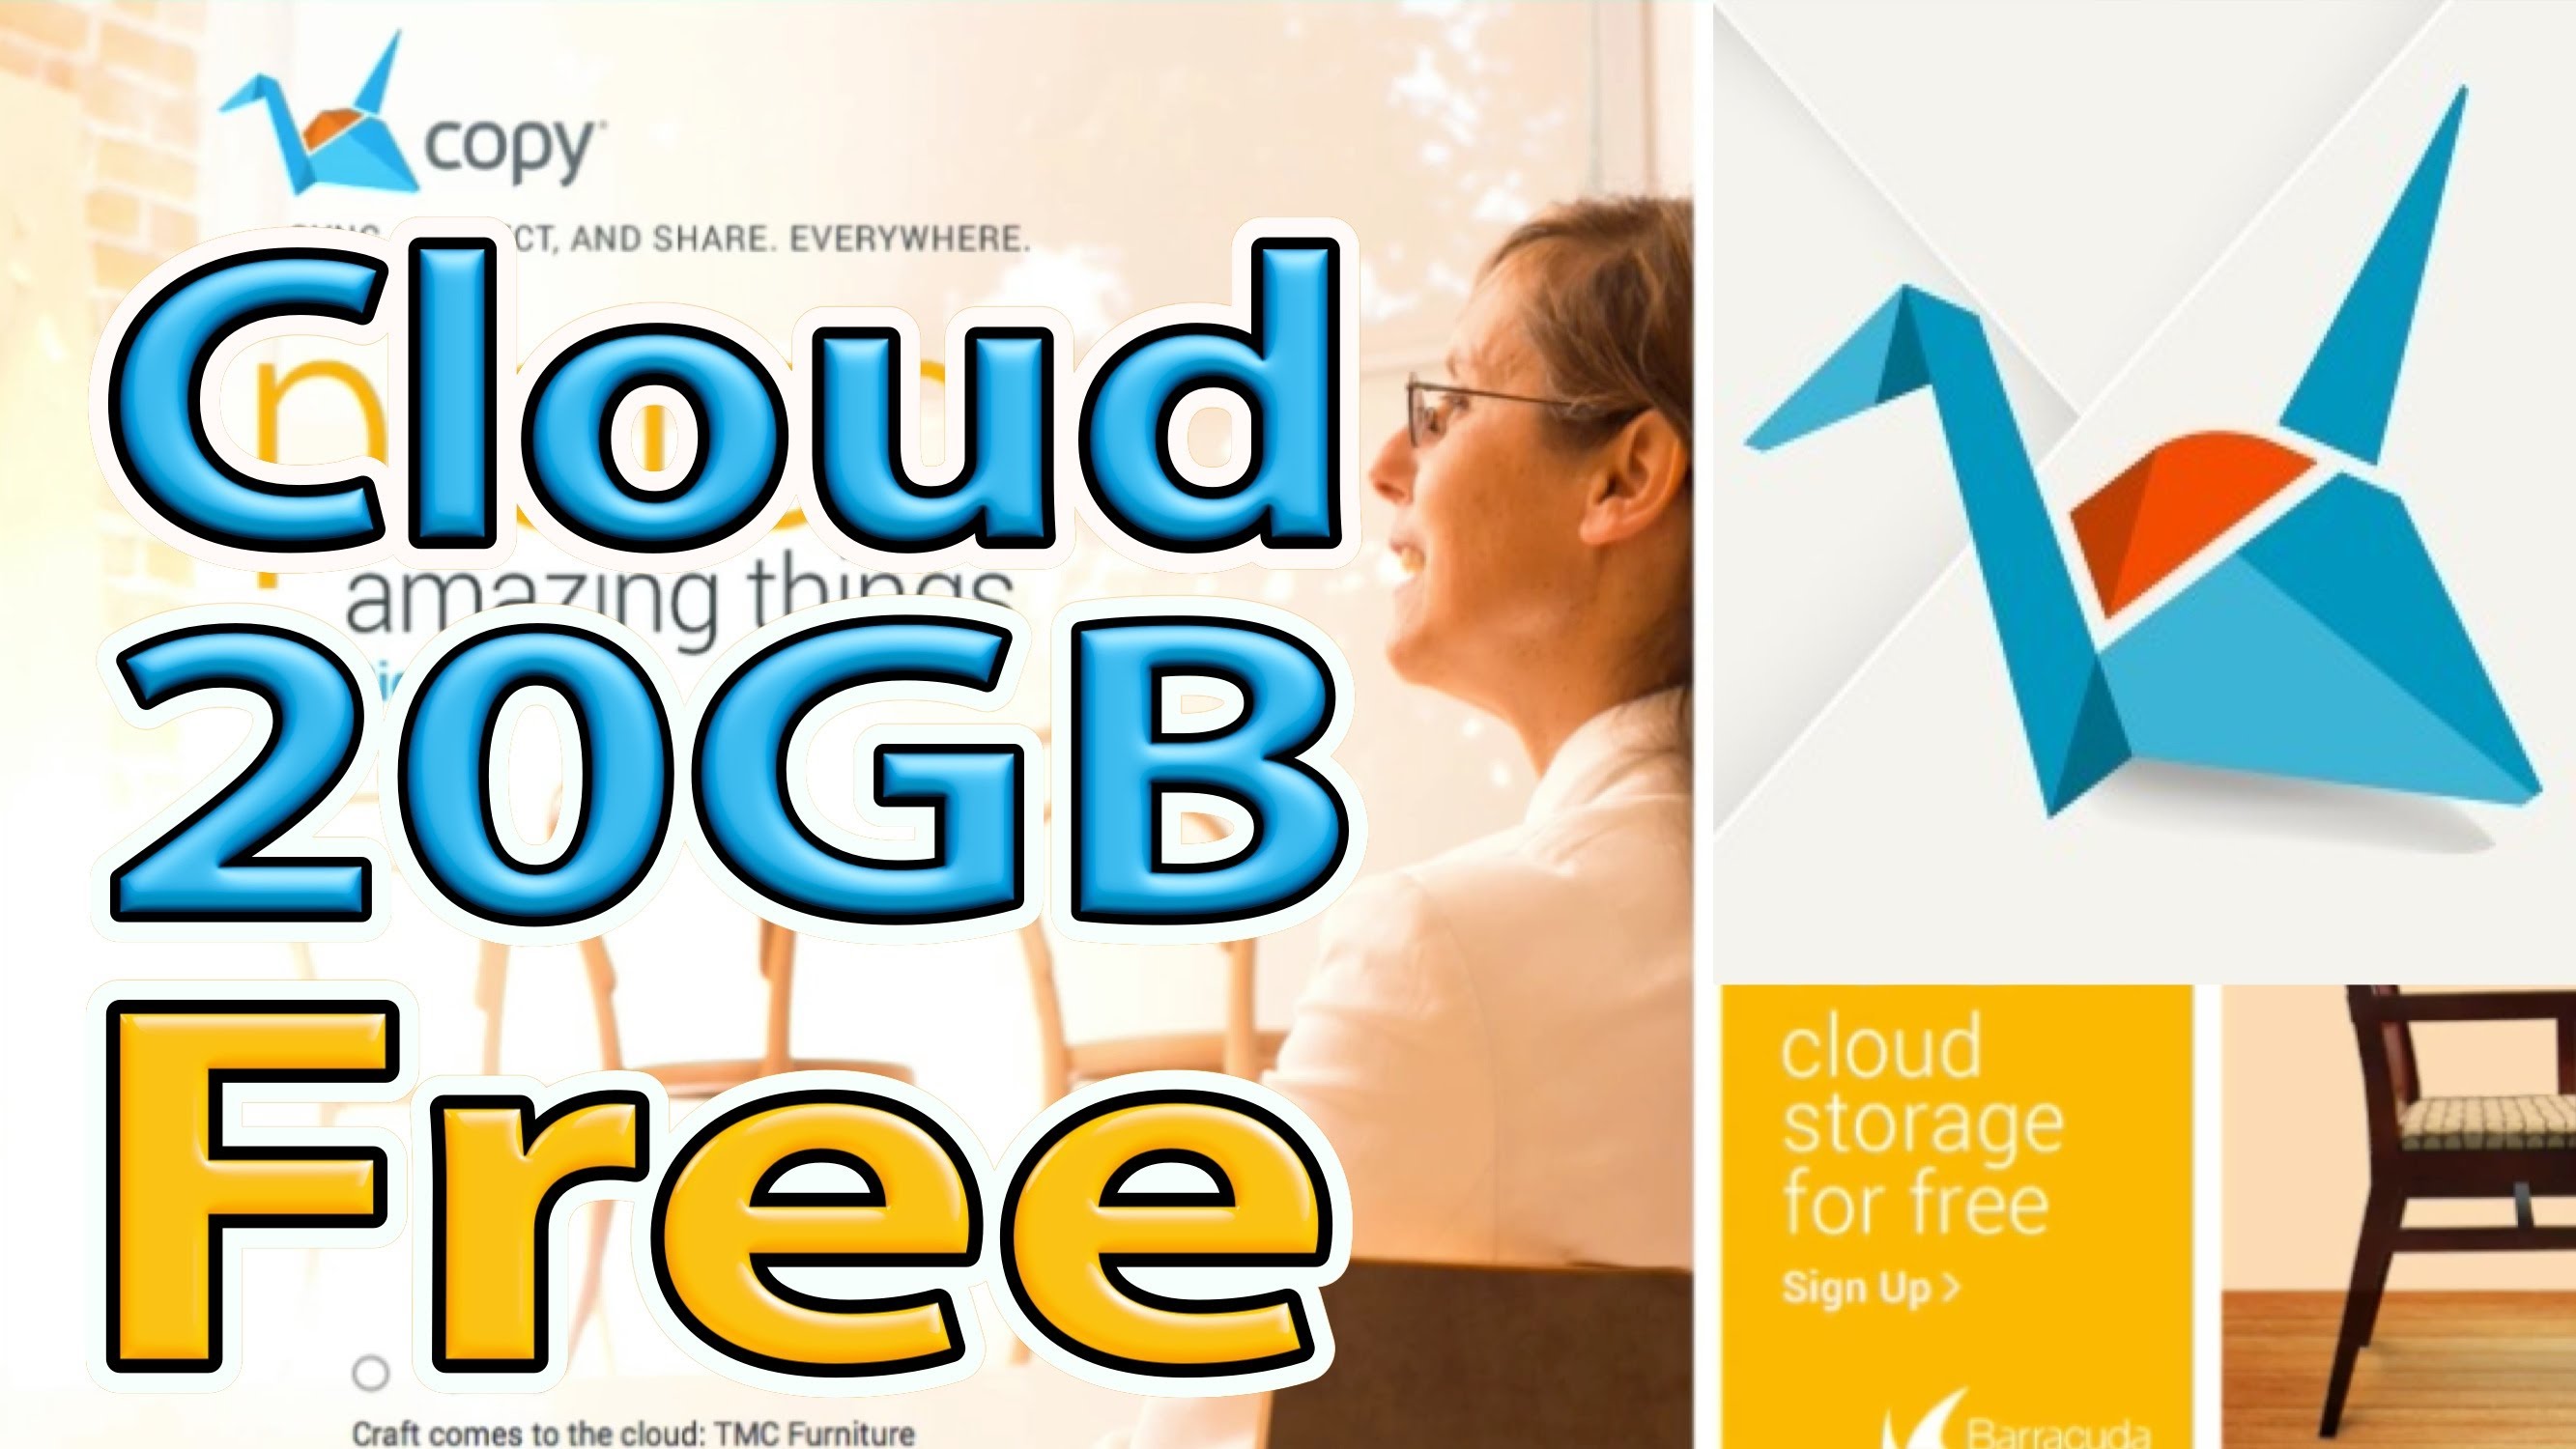 You are currently viewing Free Cloud Storage System Copy.com (20GB)